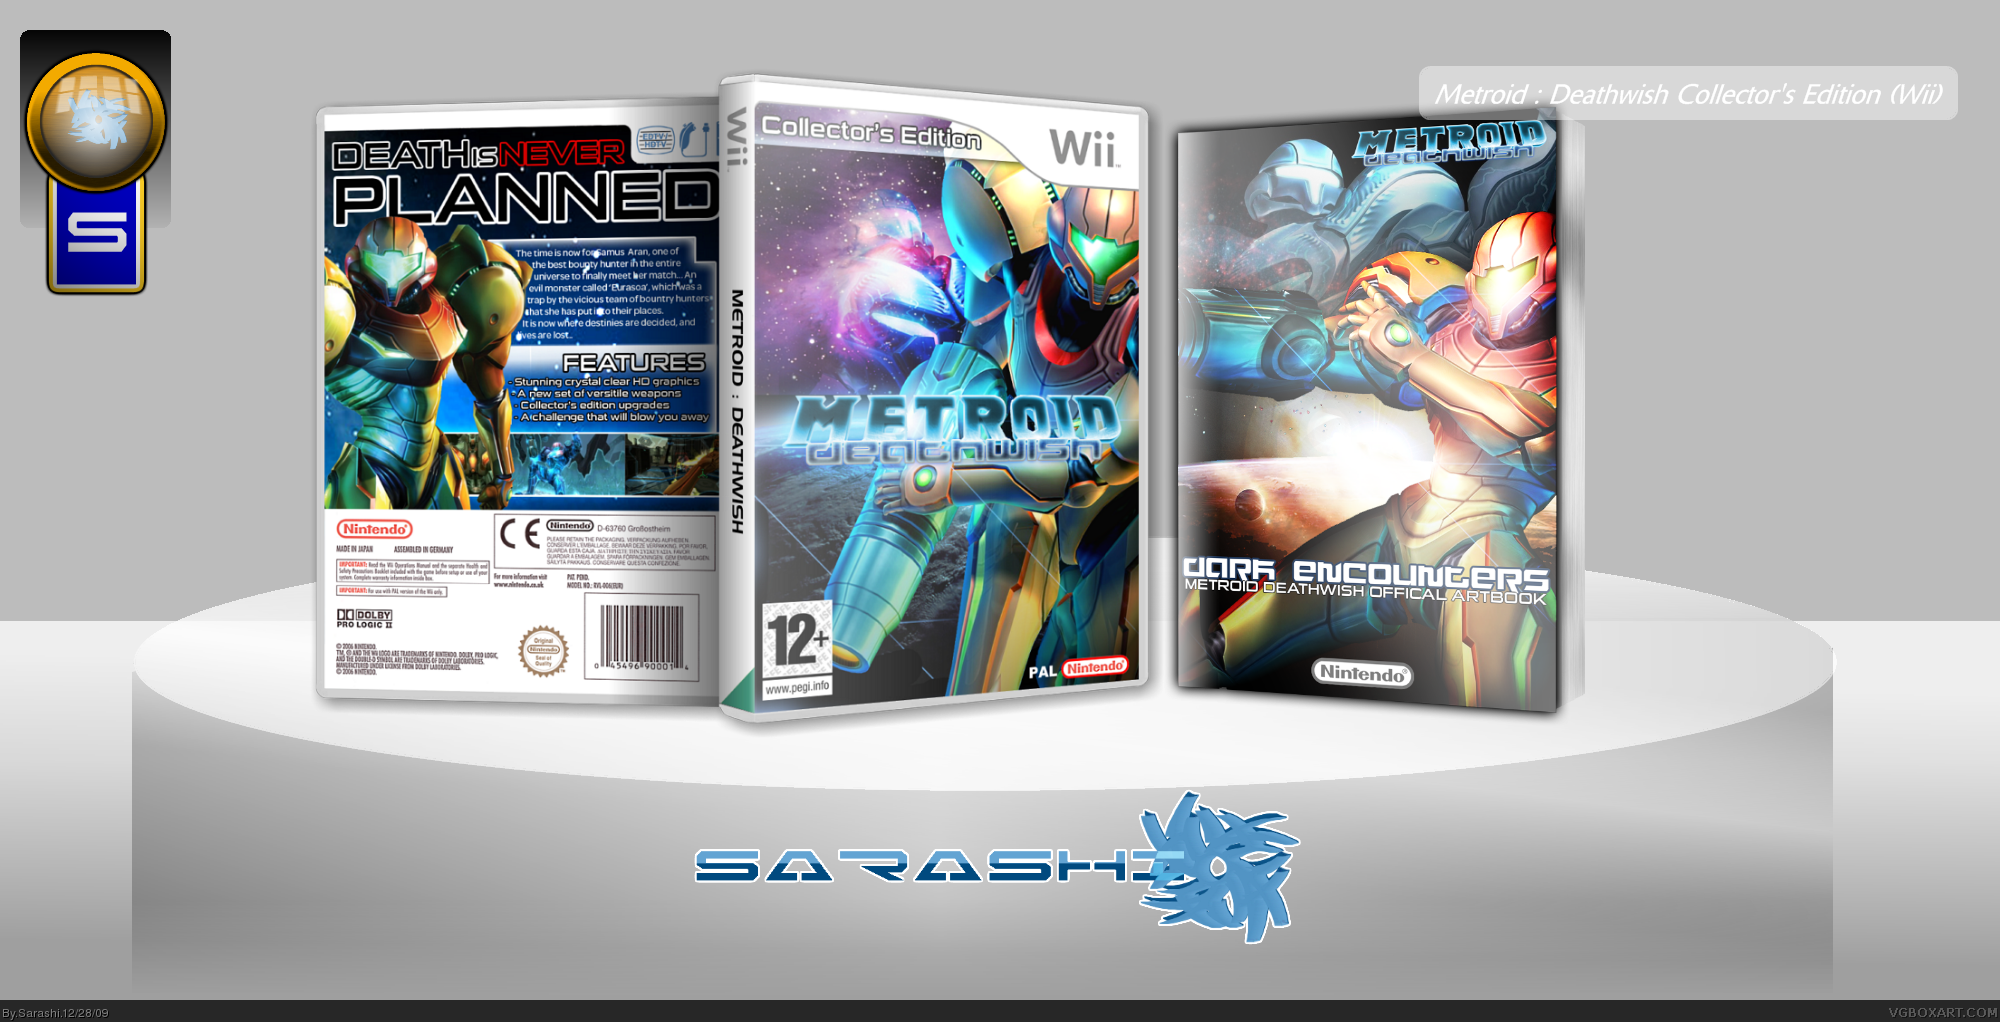 Metroid: Deathwish Collector's Edition box cover